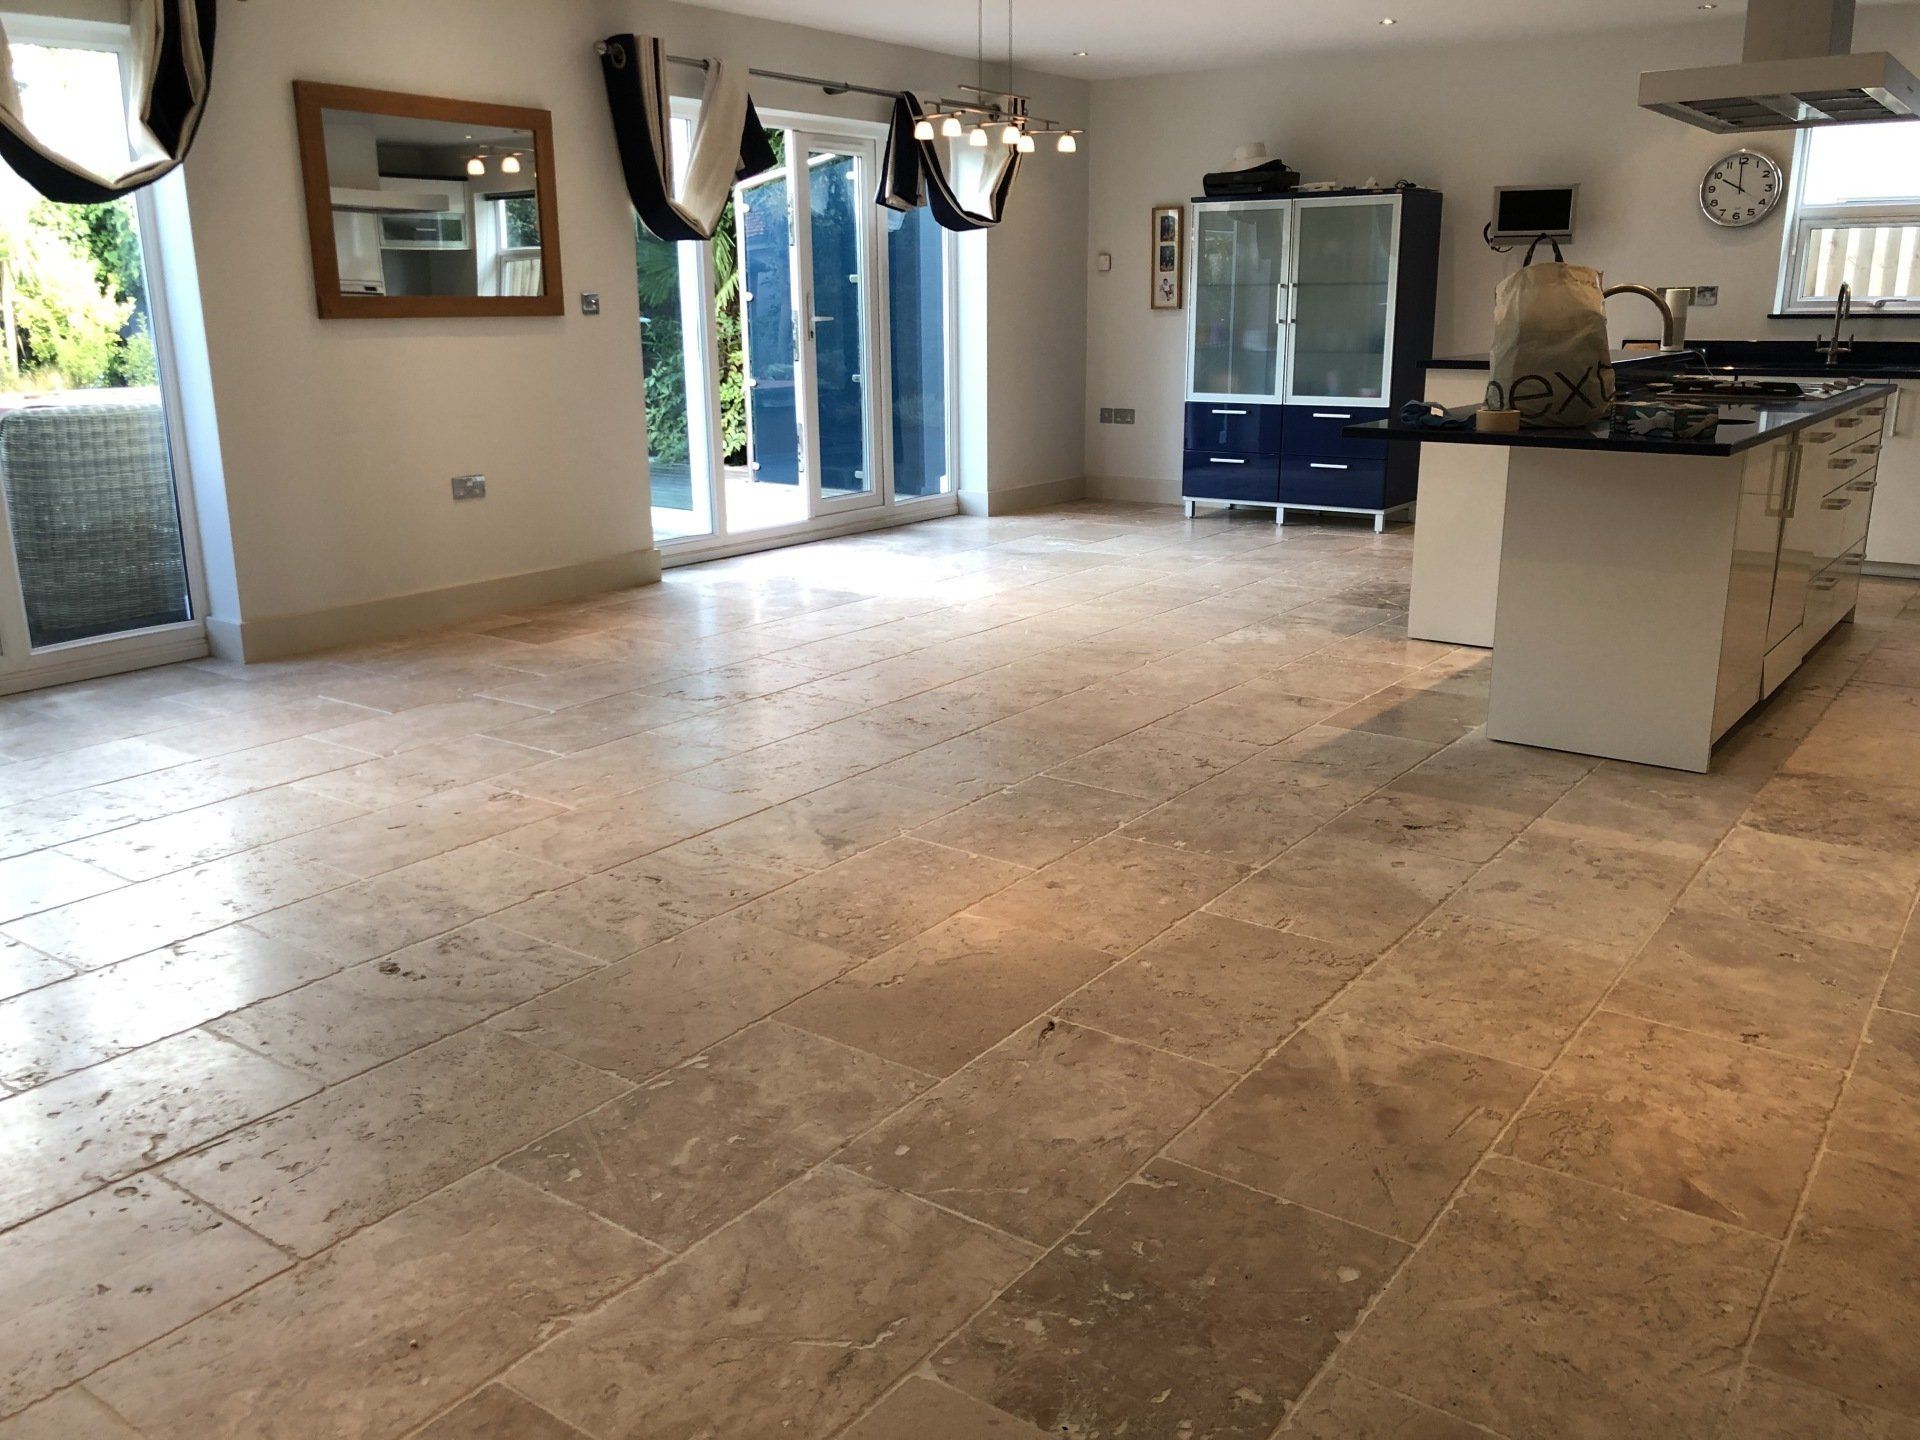 Travertine floor cleaned & HD sealed in Bournemouth Dorset by All Surface Care